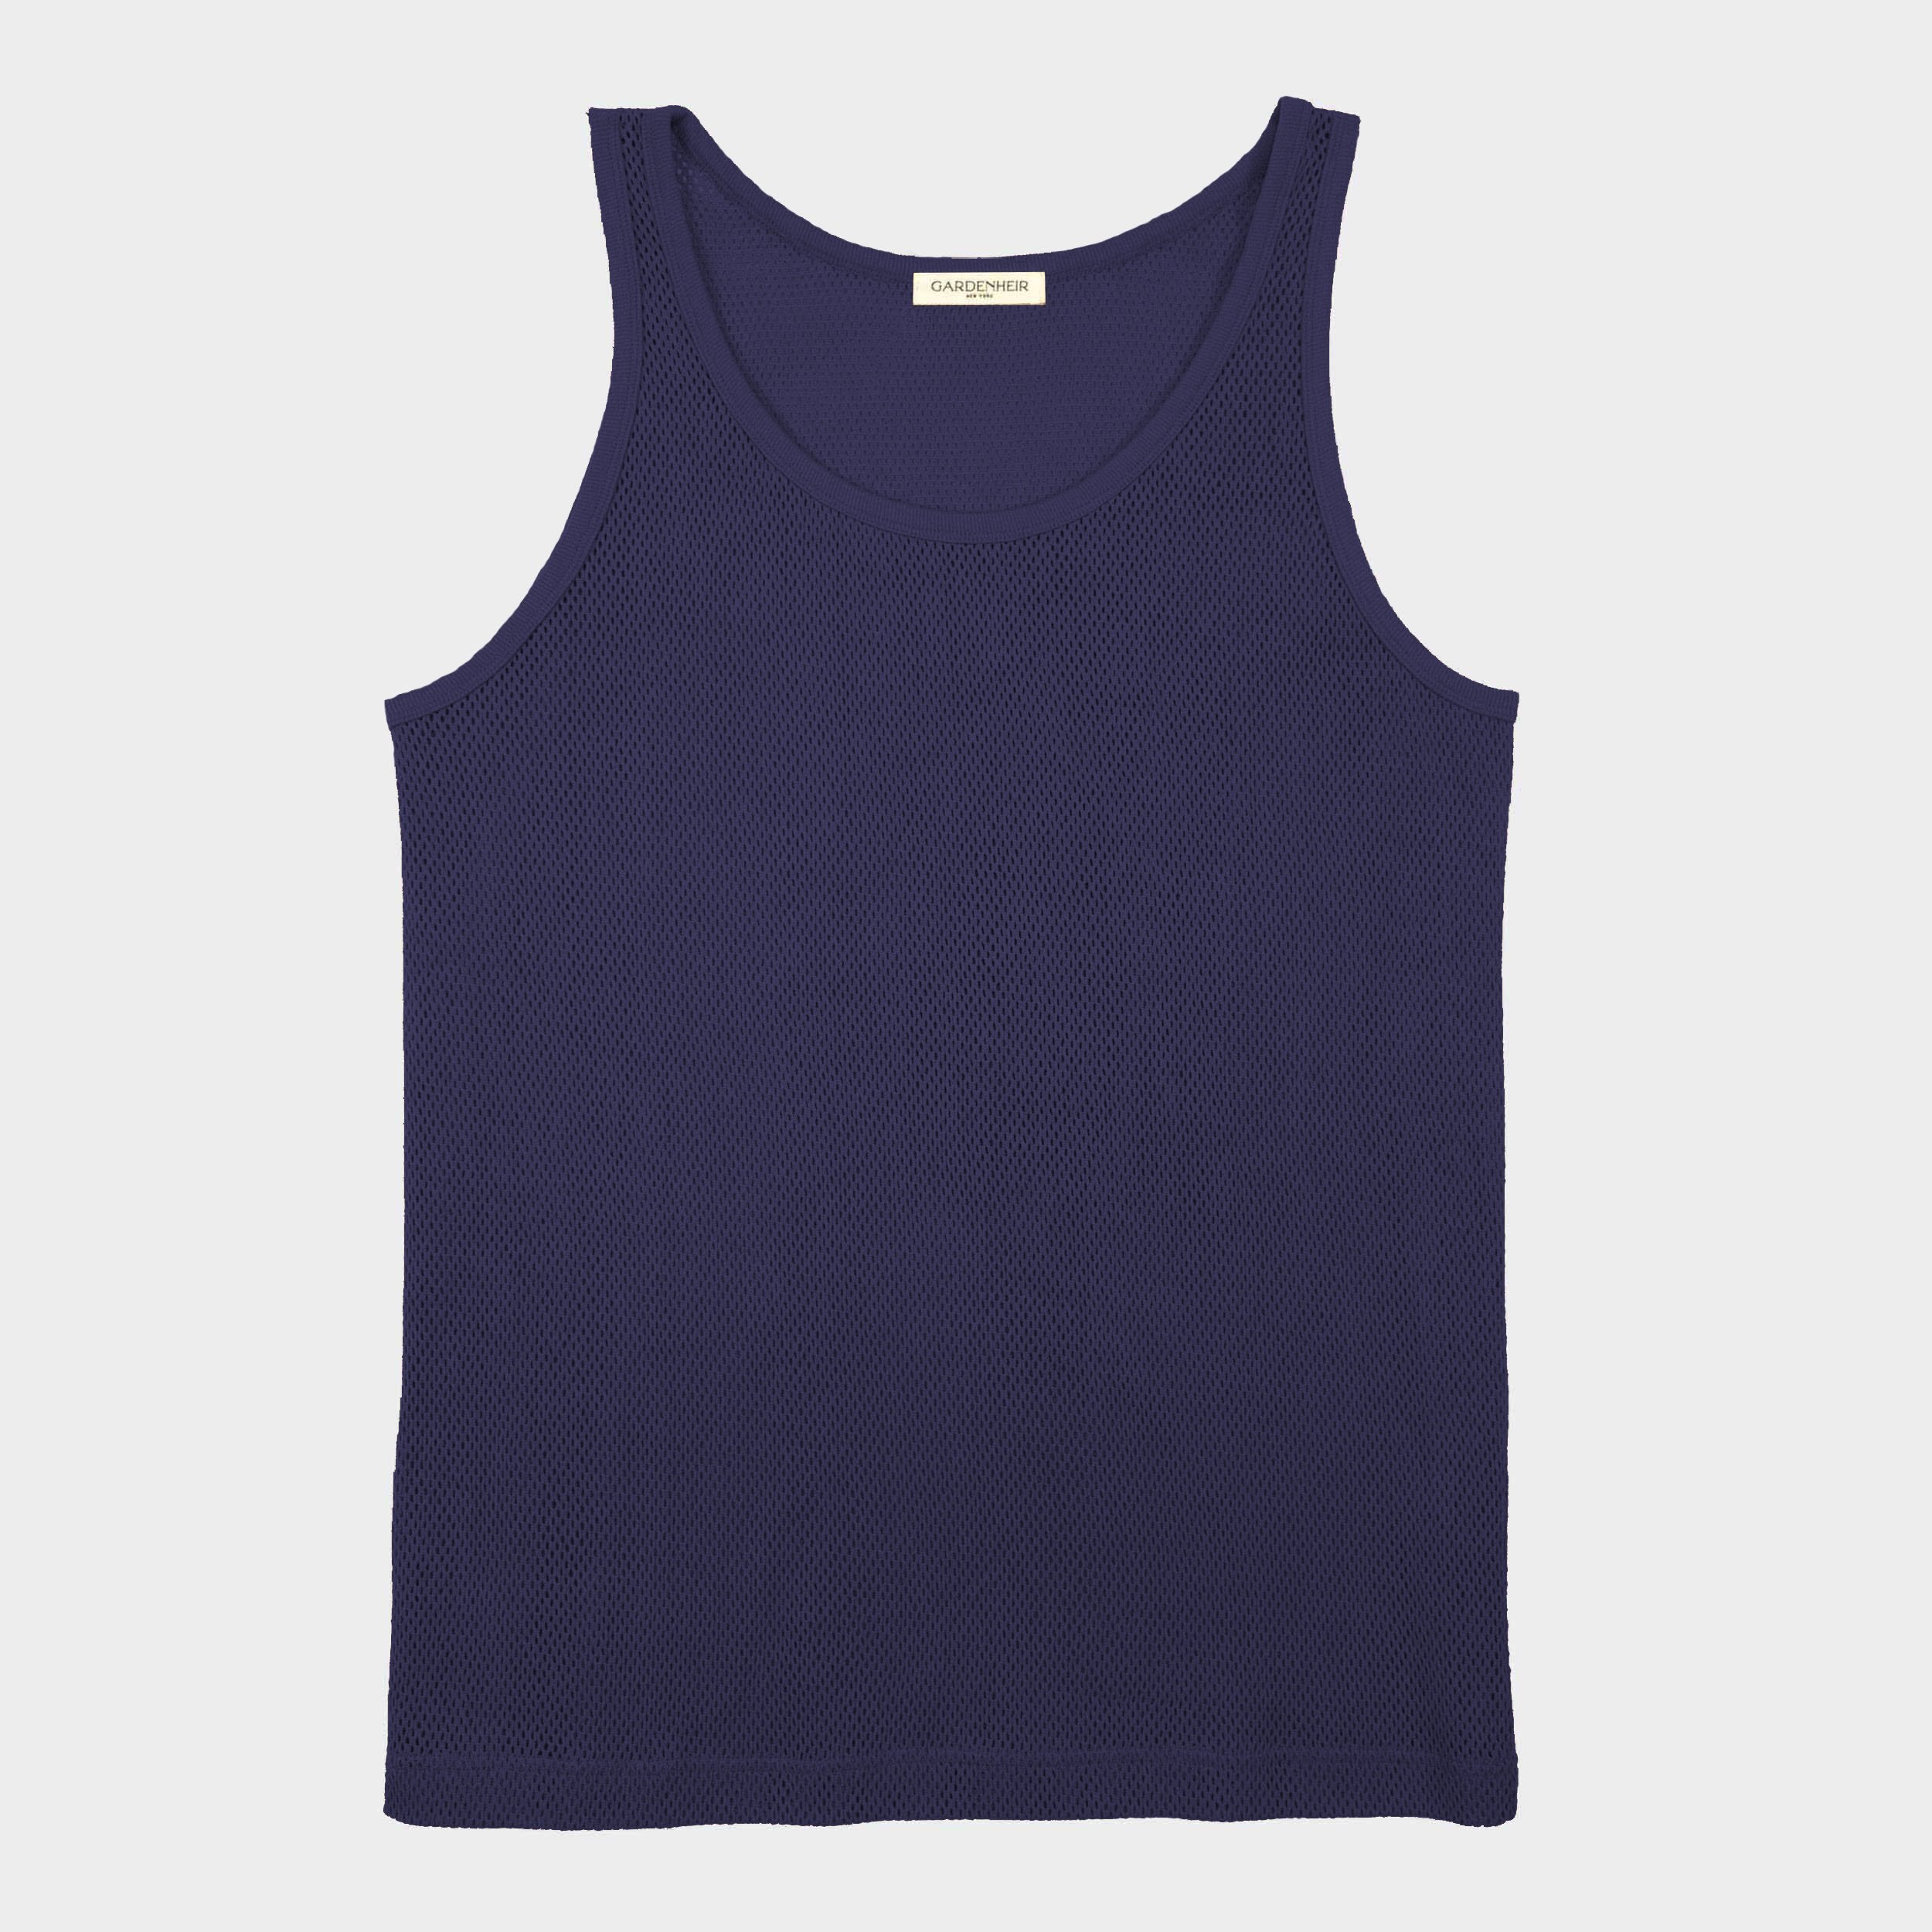 Cotton Mesh Tank Top in Blueberry